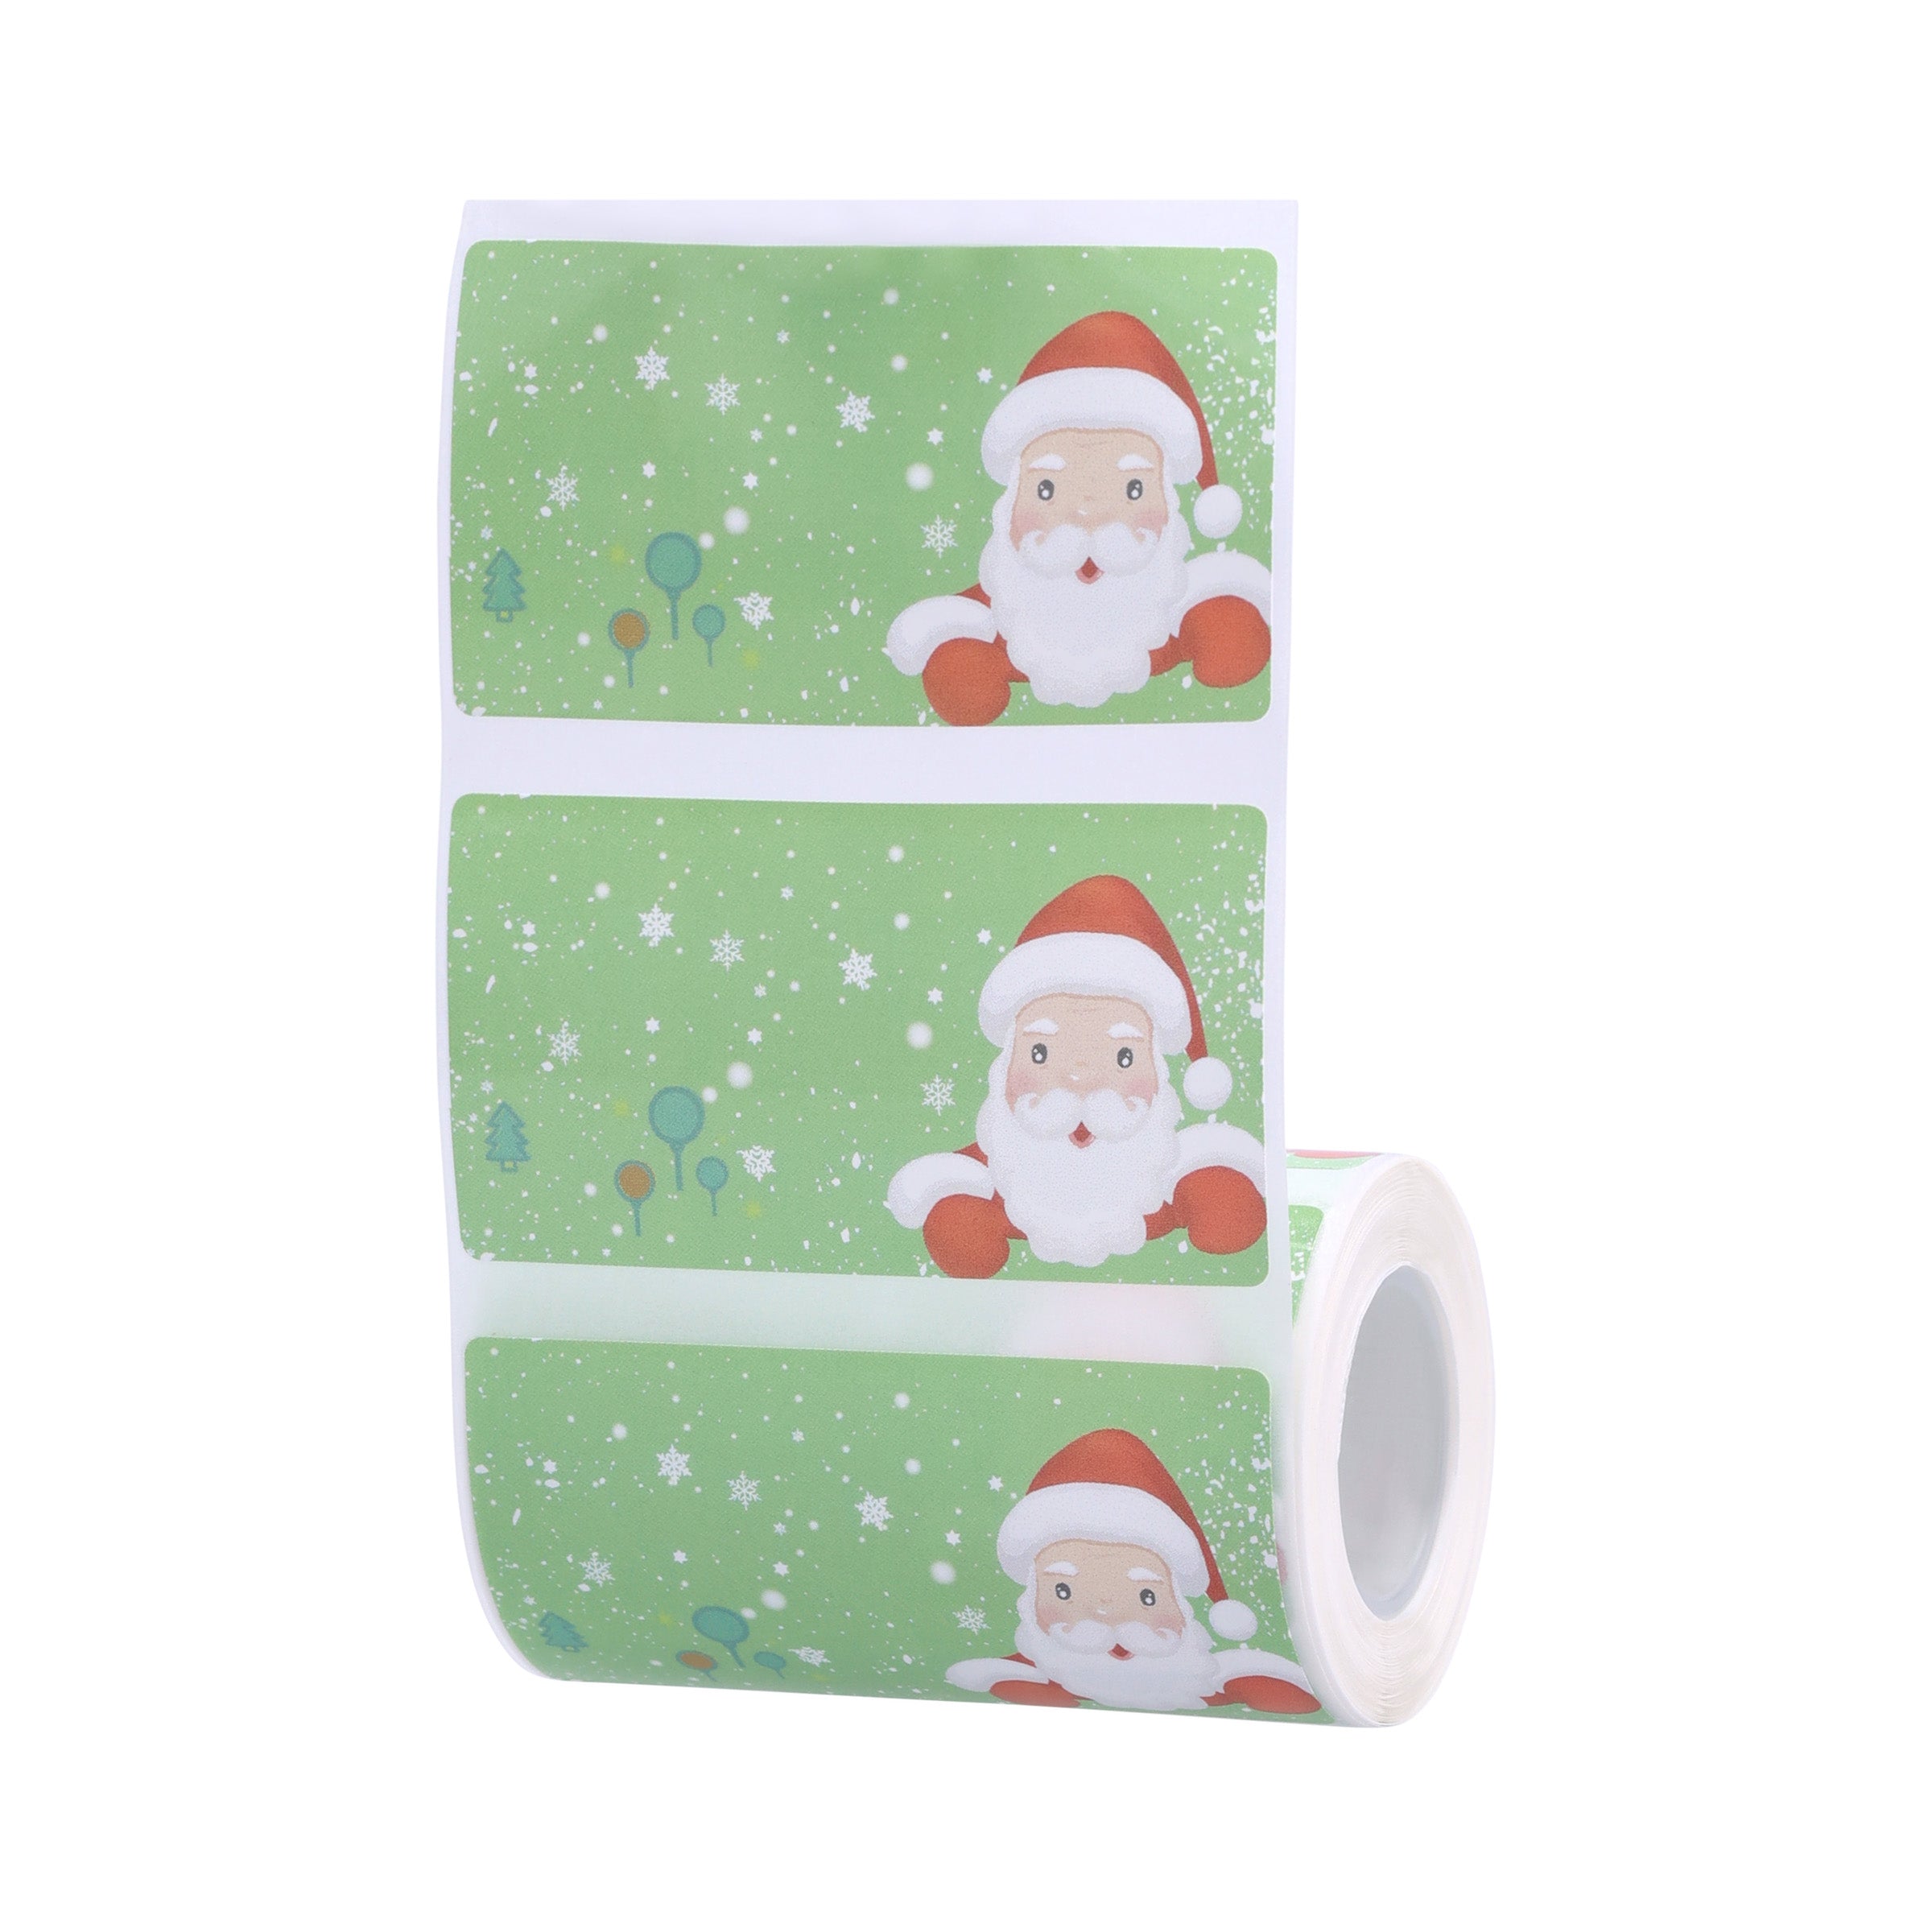 NB498 - NIIMBOT - B3S ONLY - T70*38MM - 180 LABELS PER ROLL - CHRISTMAS